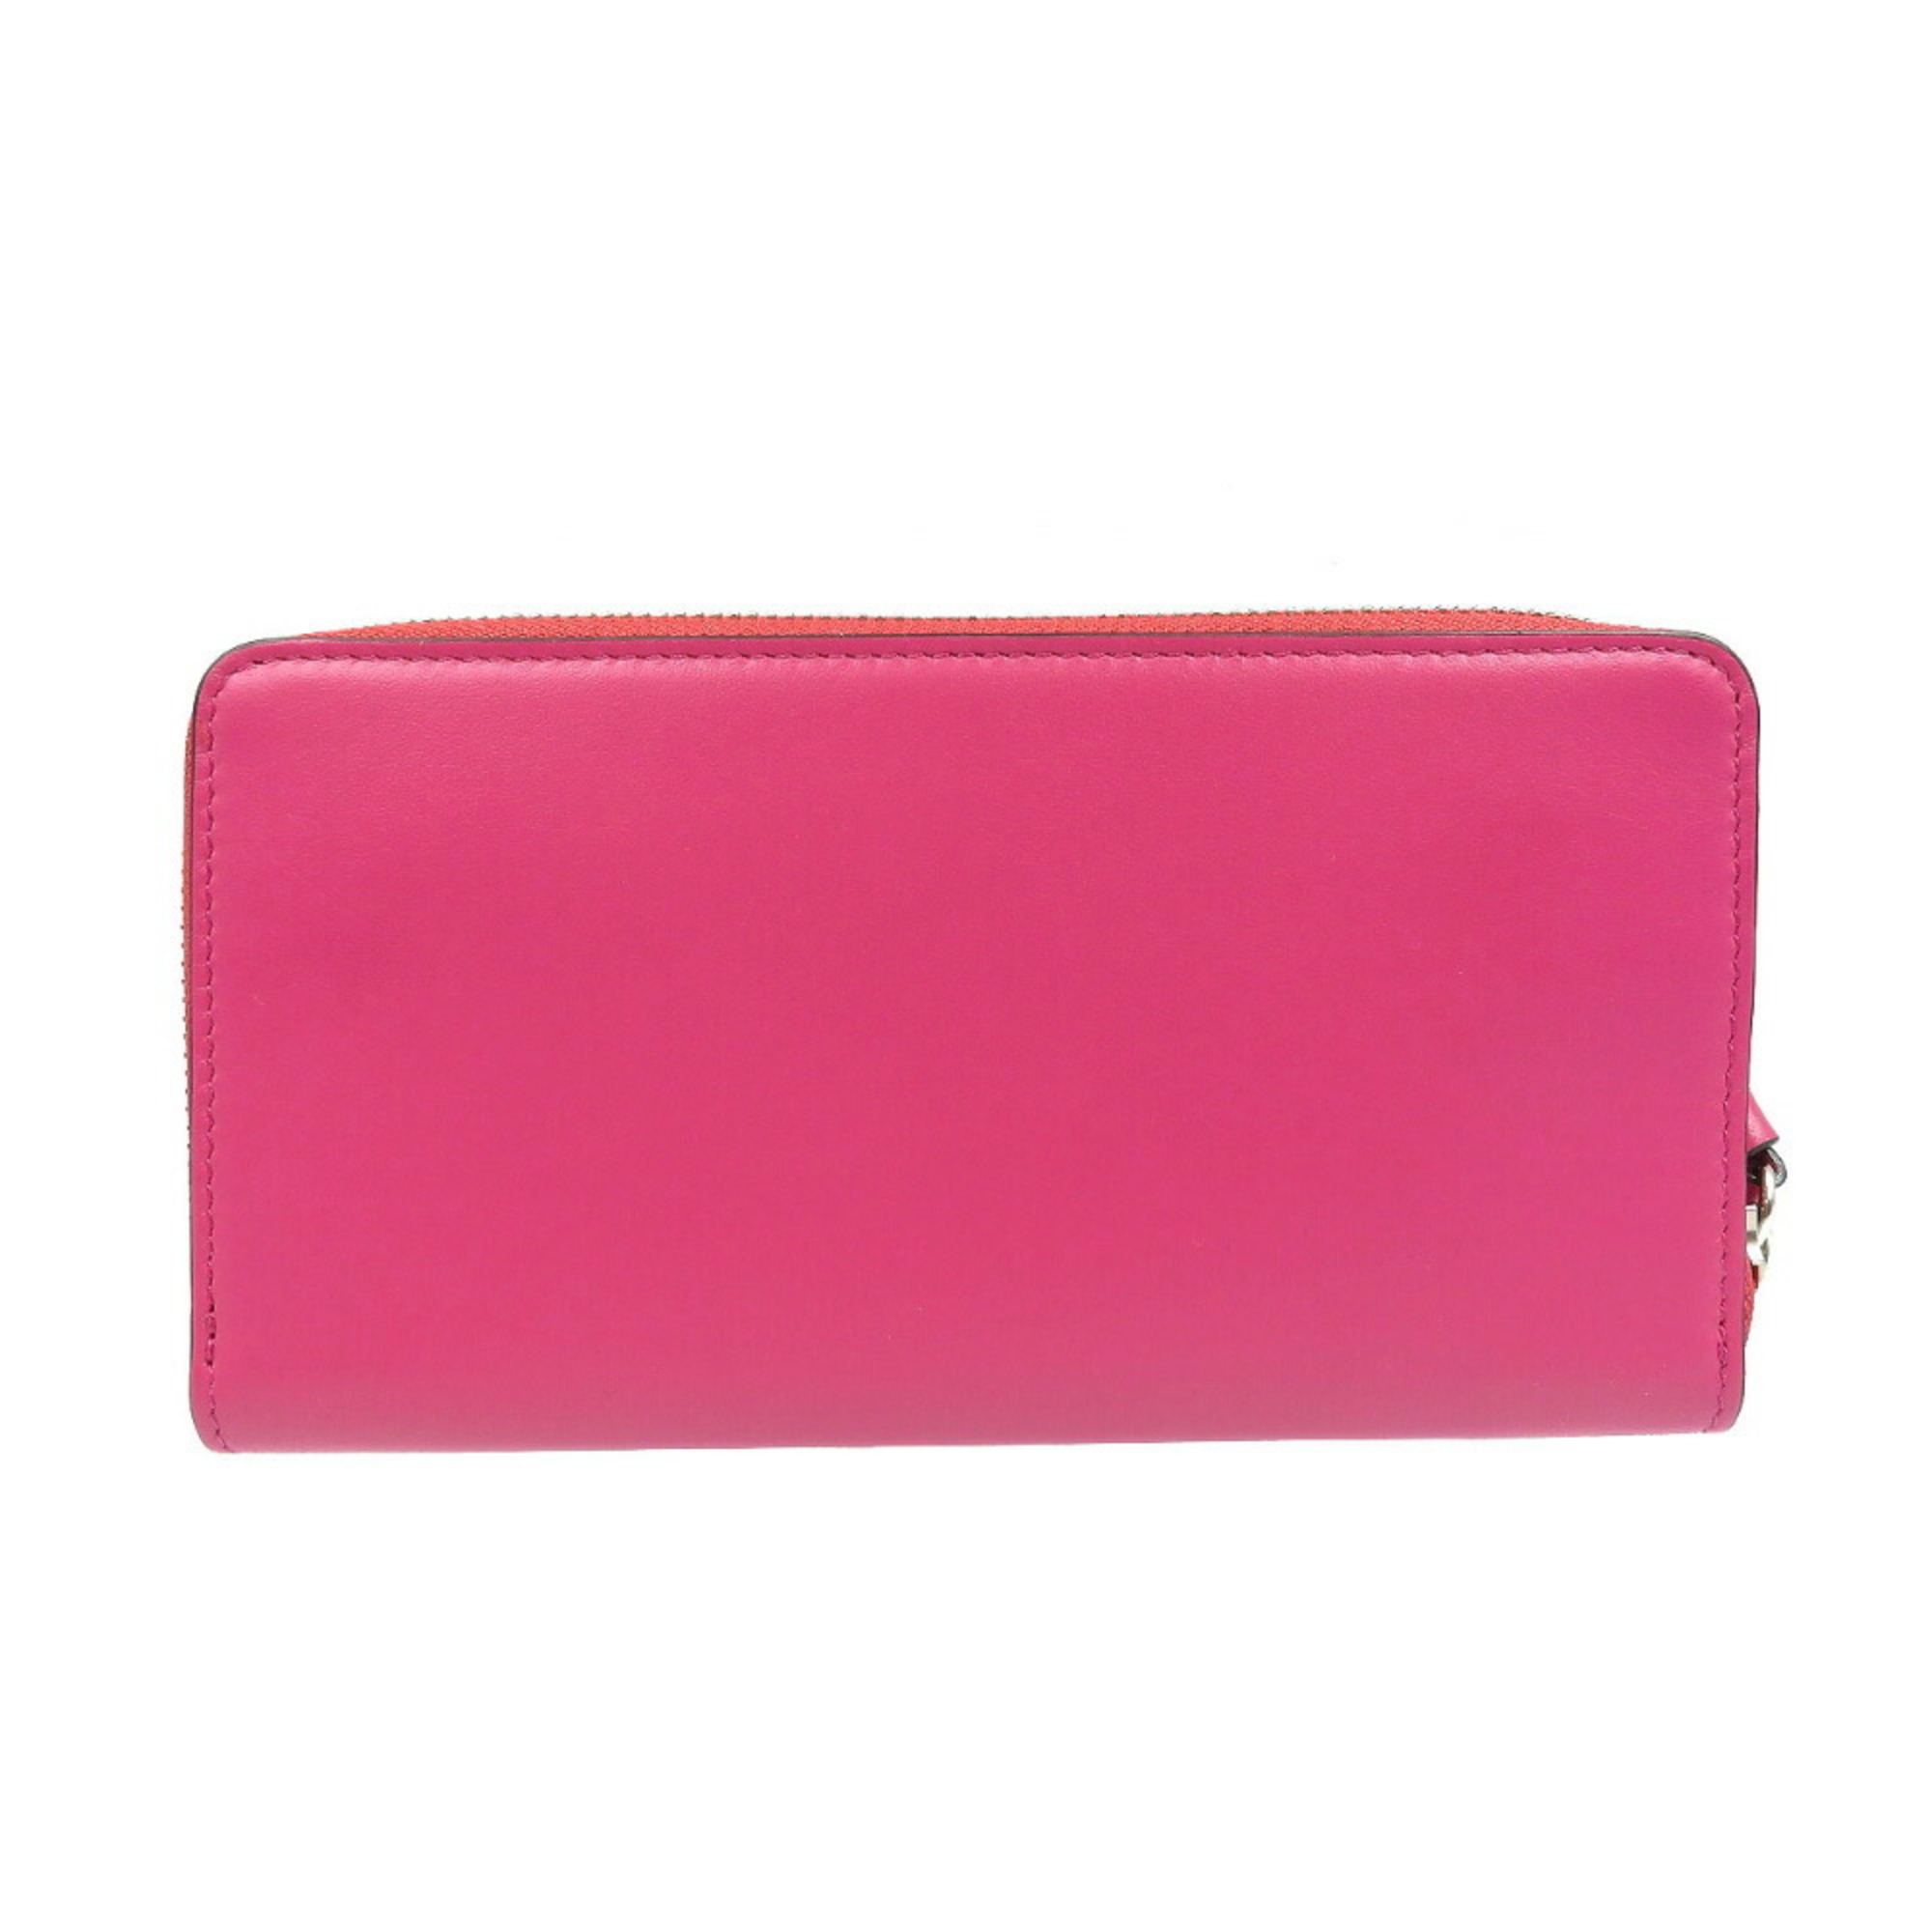 Jimmy Choo Pippa Leather Pink Round Long Wallet 0073JIMMY CHOO 6A0073IEE5